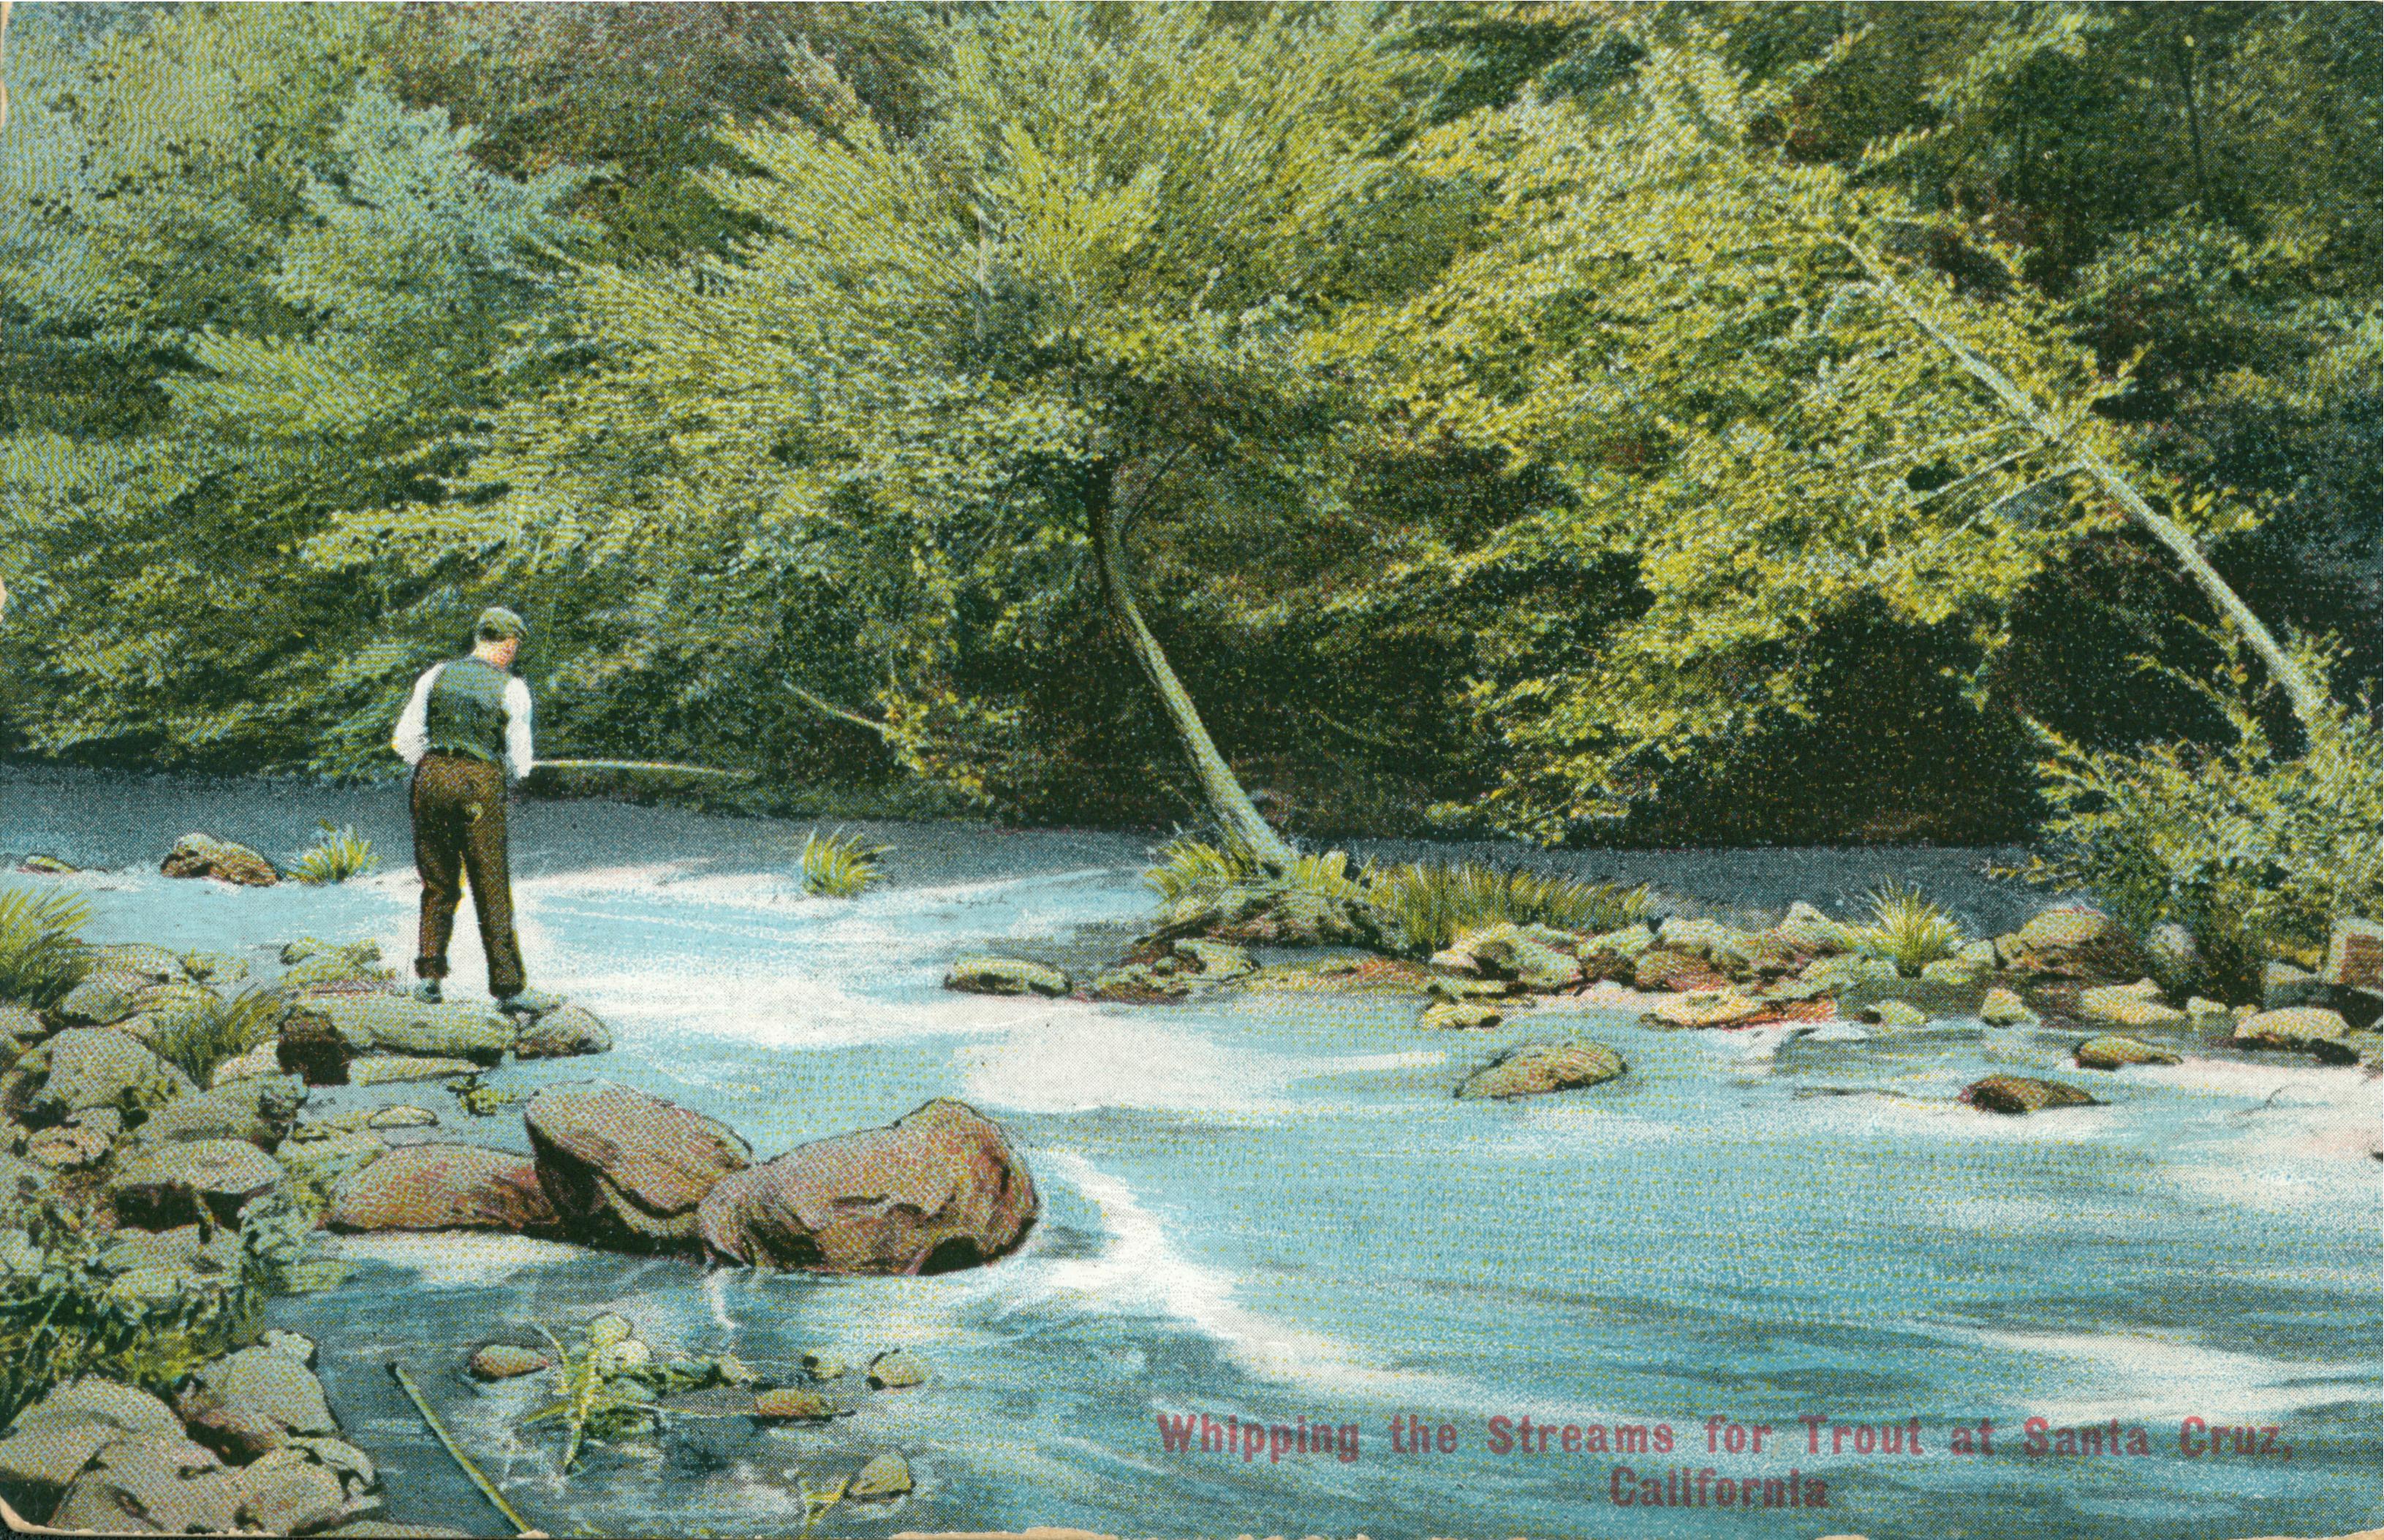 Shows a man fishing in a rushing stream